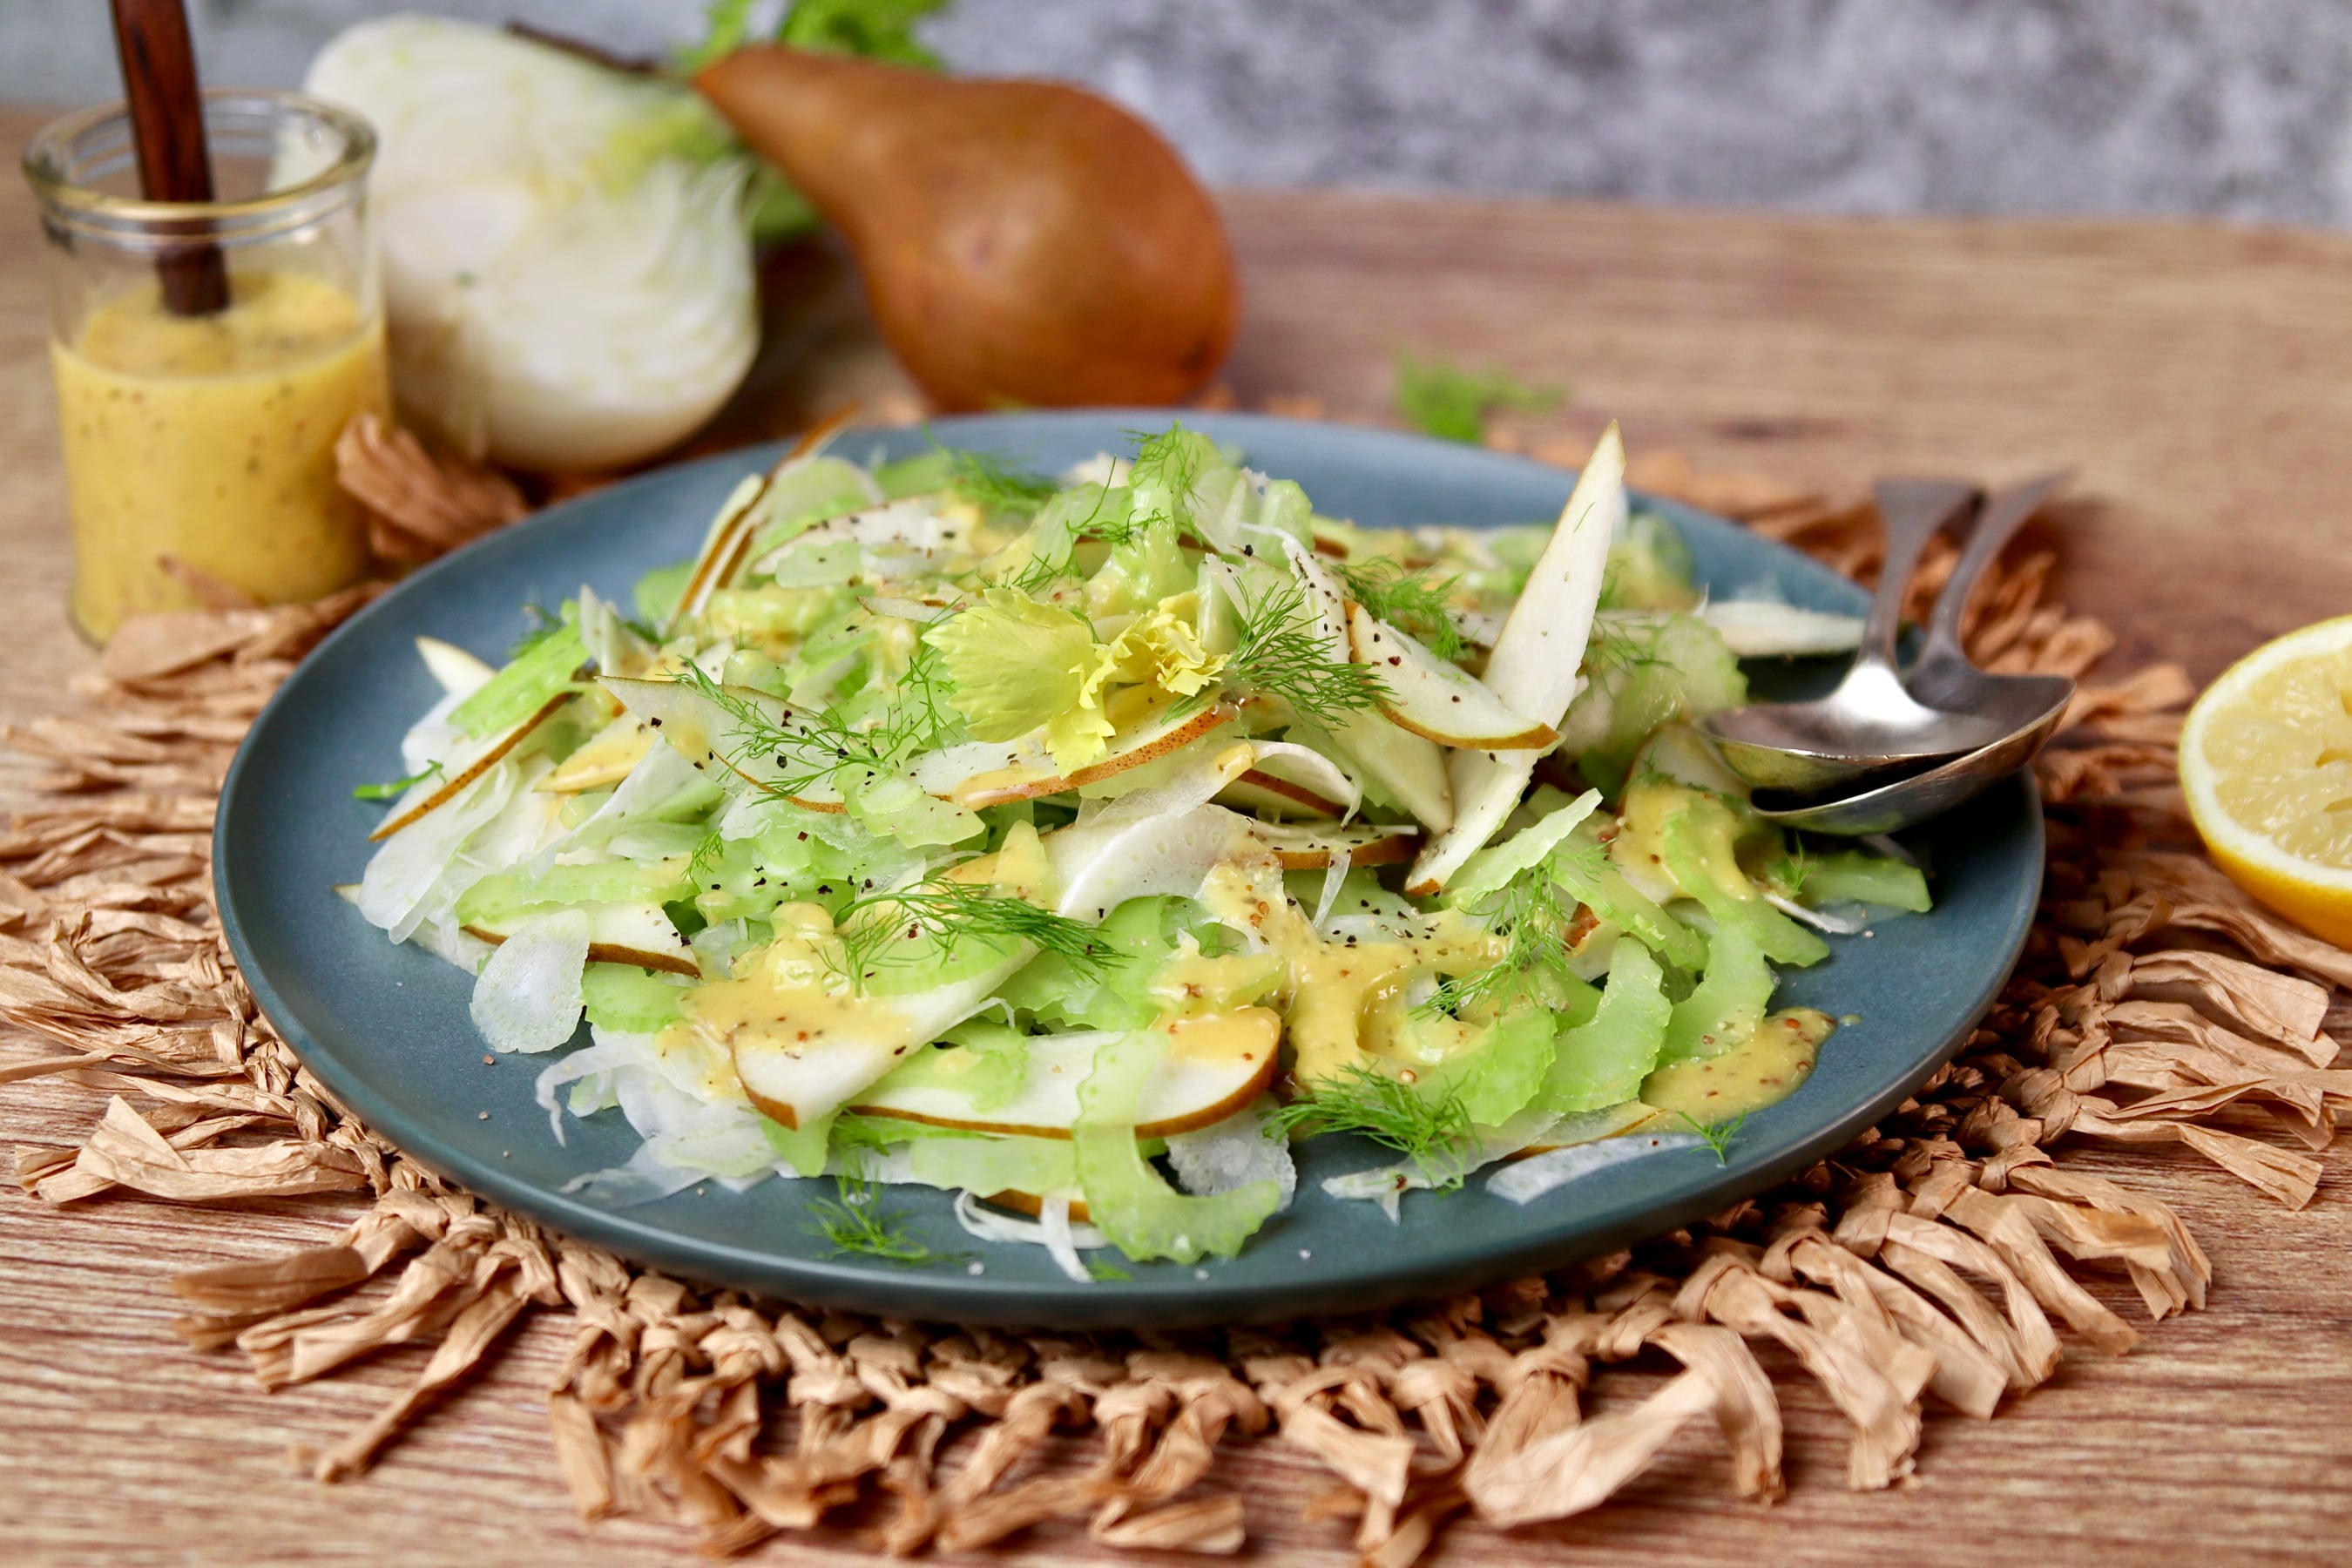 Plate of celery, pear and fennel salad.